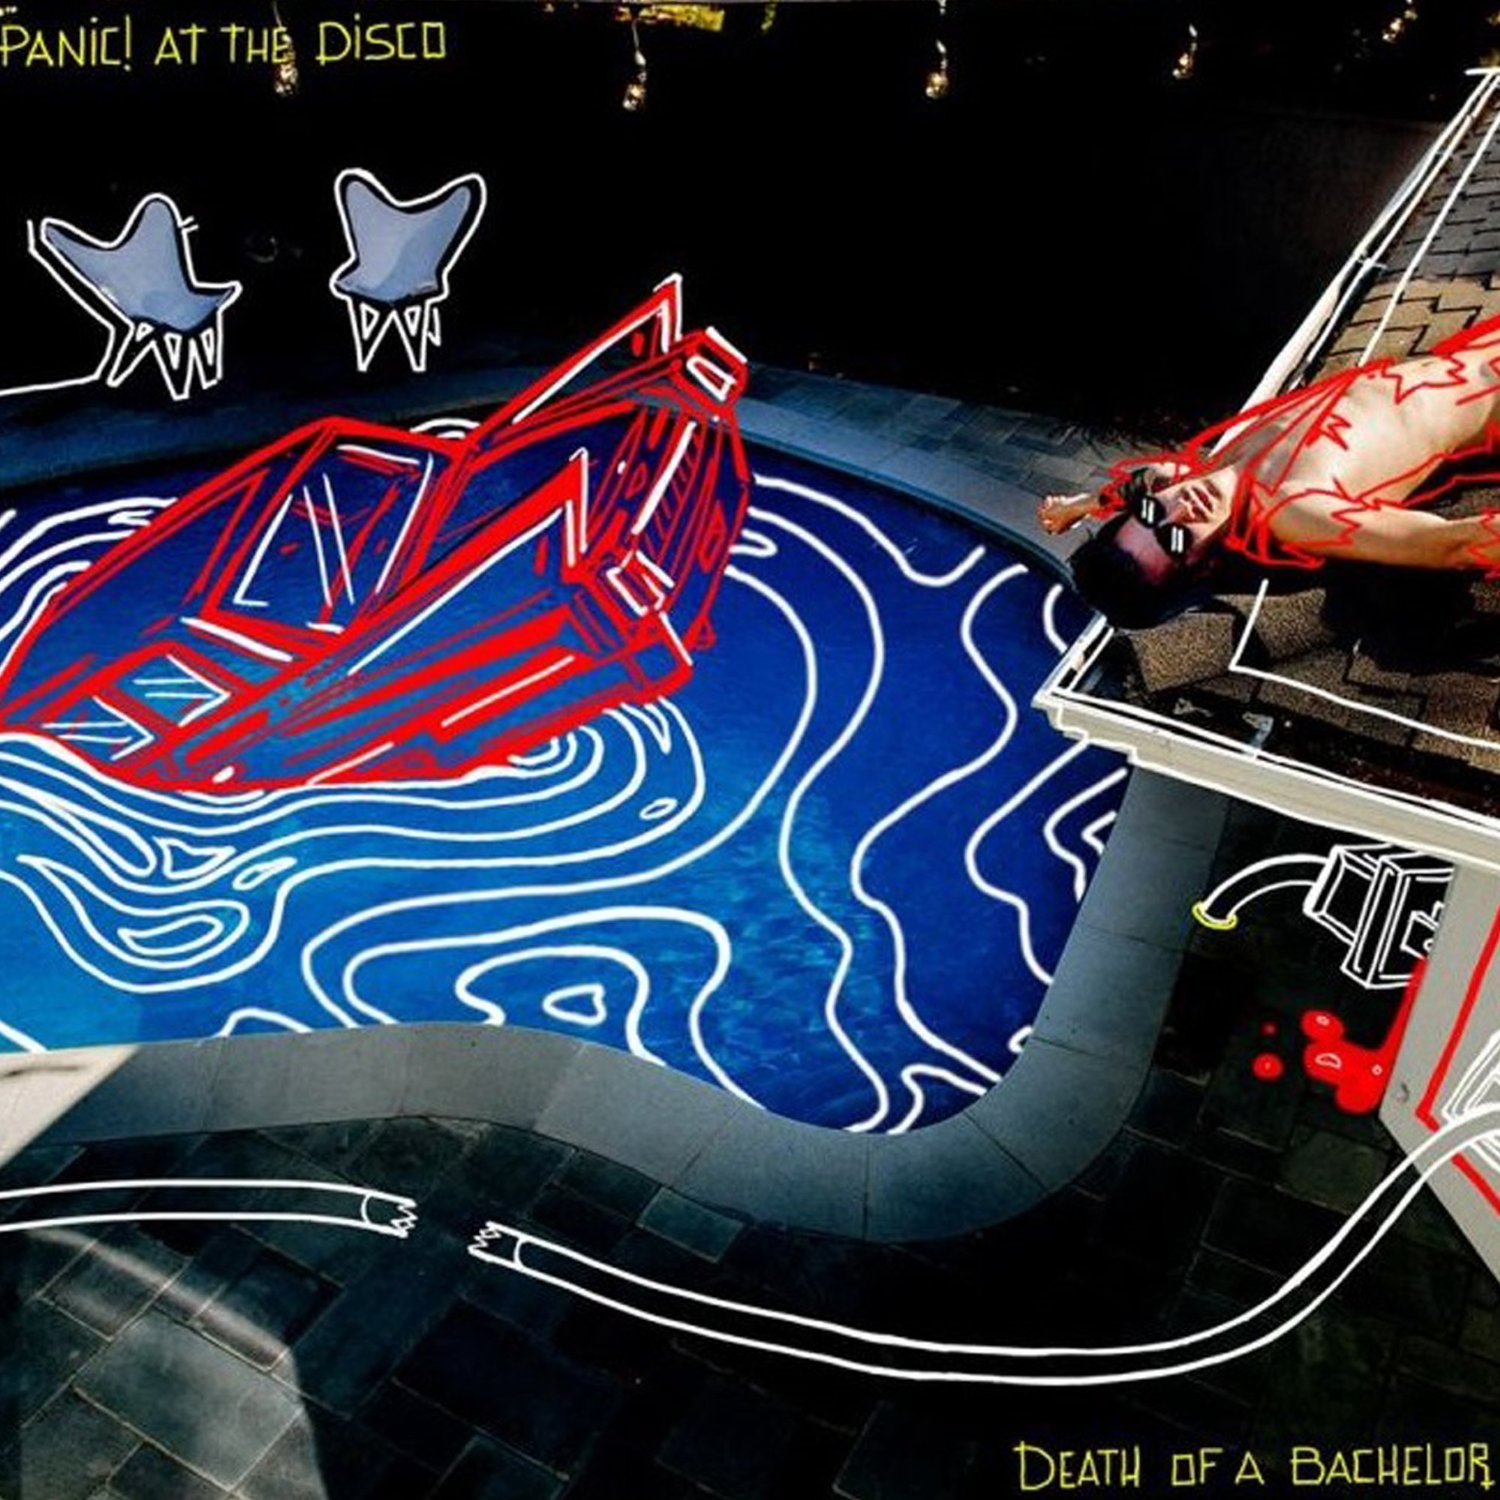 Panic At The Disco - Death Of A Bachelor (2016) [HDTracks FLAC 24bit/96kHz]